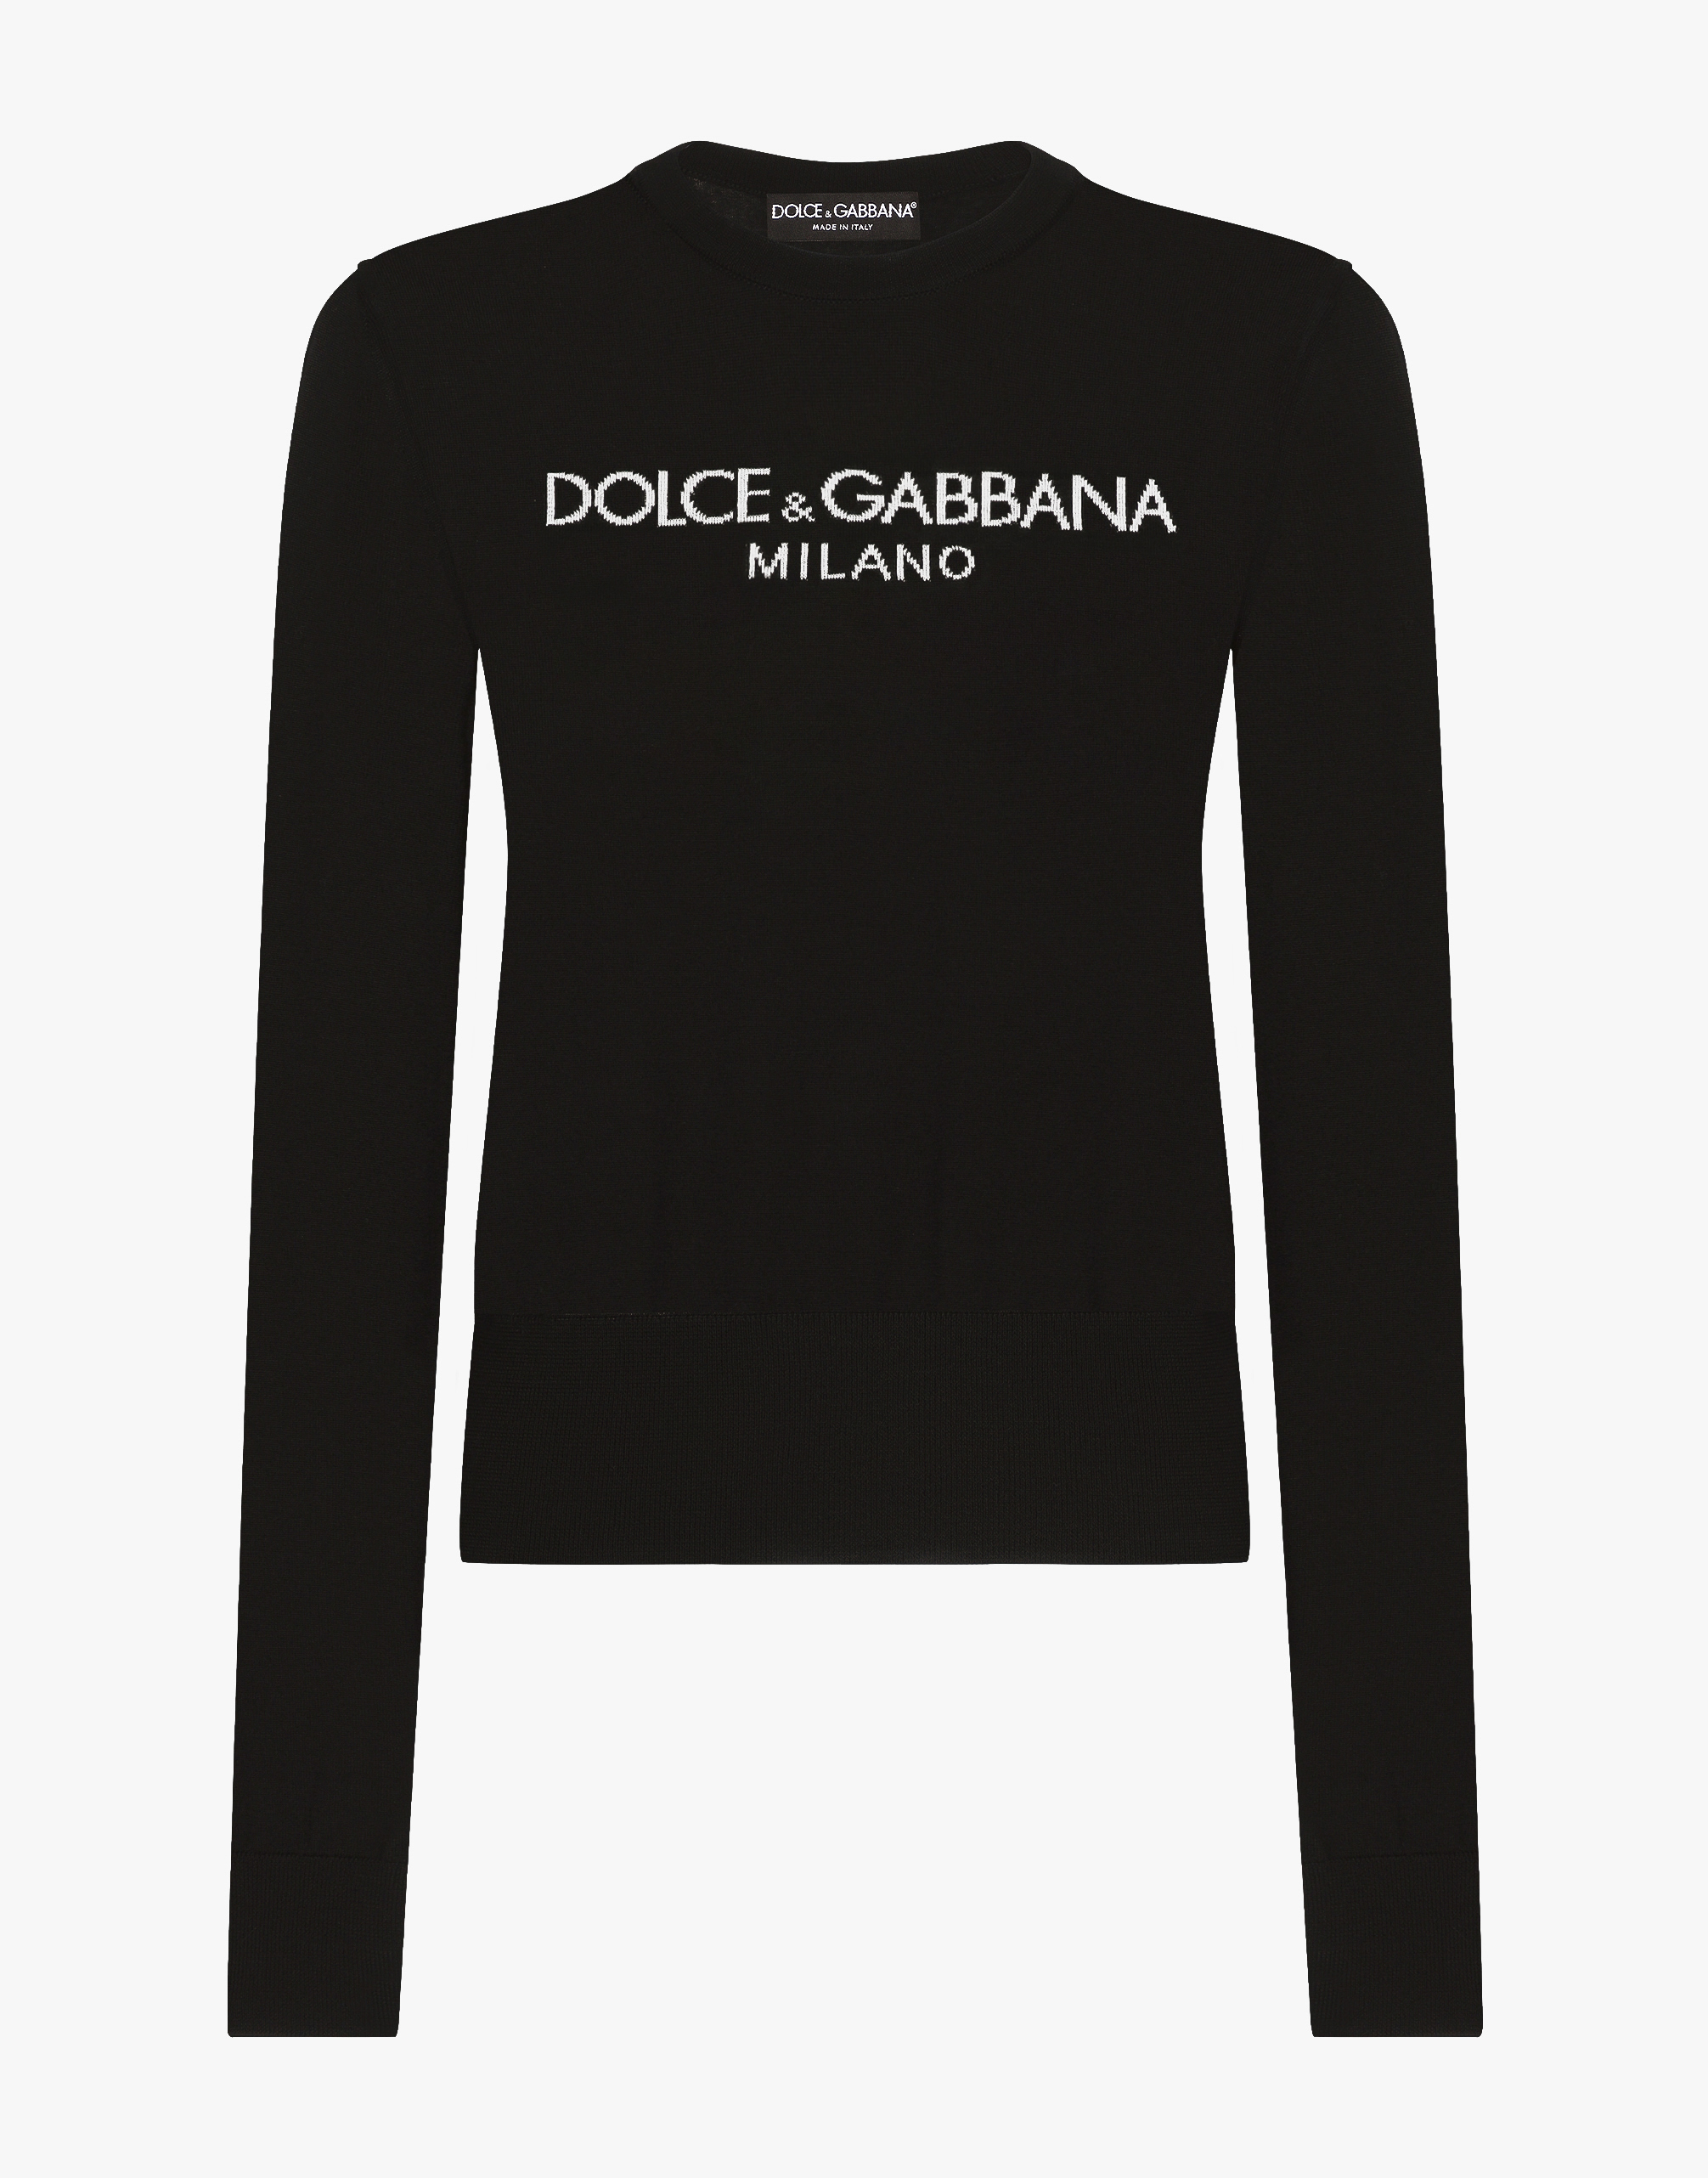 Wool sweater with Dolce&Gabbana logo inlay in Black for Women 